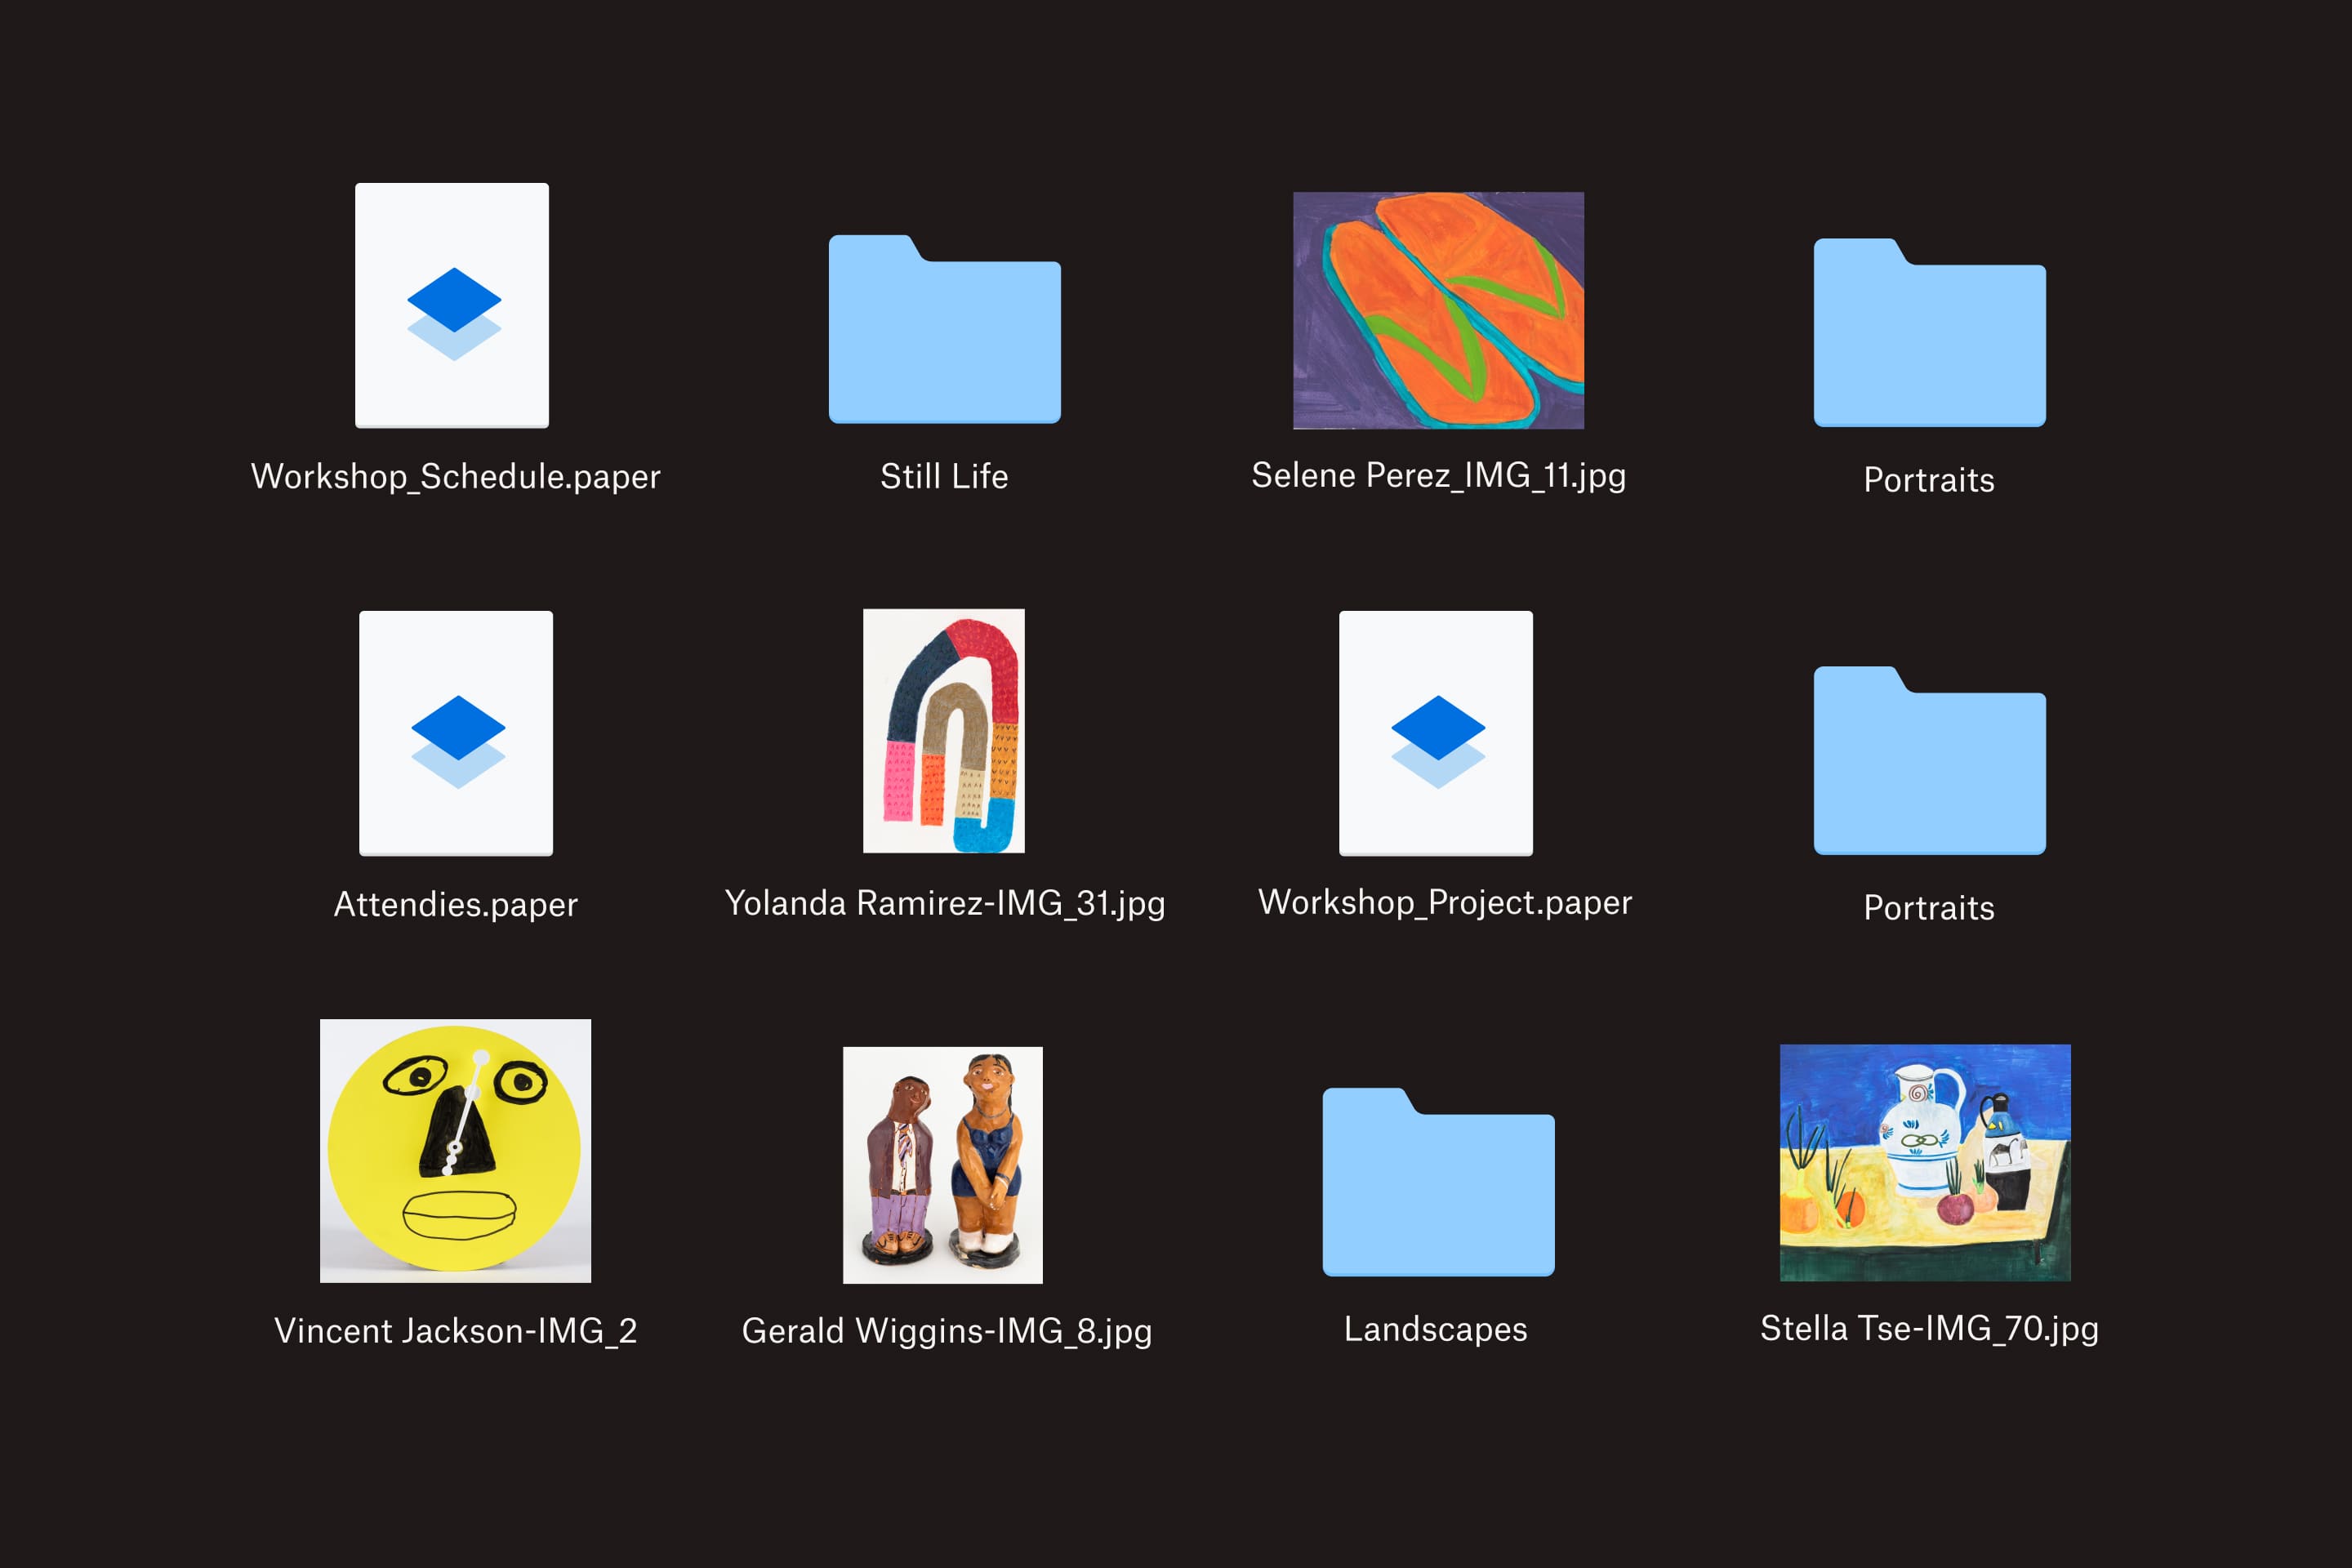 Twelve files and folders in Dropbox, which include images of art, workshop details, and portraits.